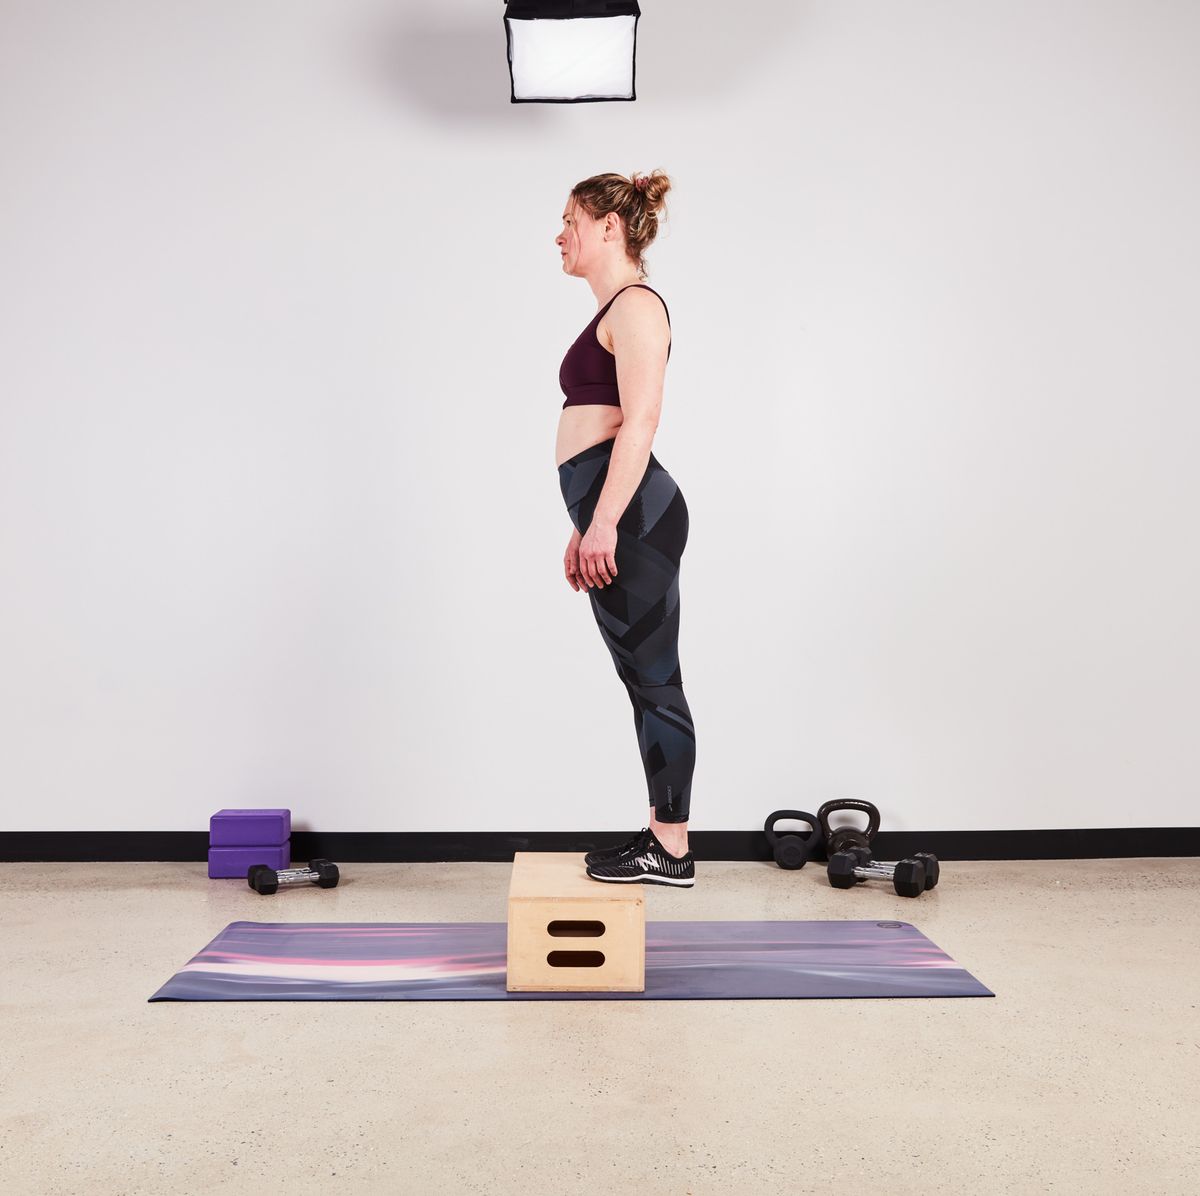 Use these ankle flexibility tests to determine what mobility